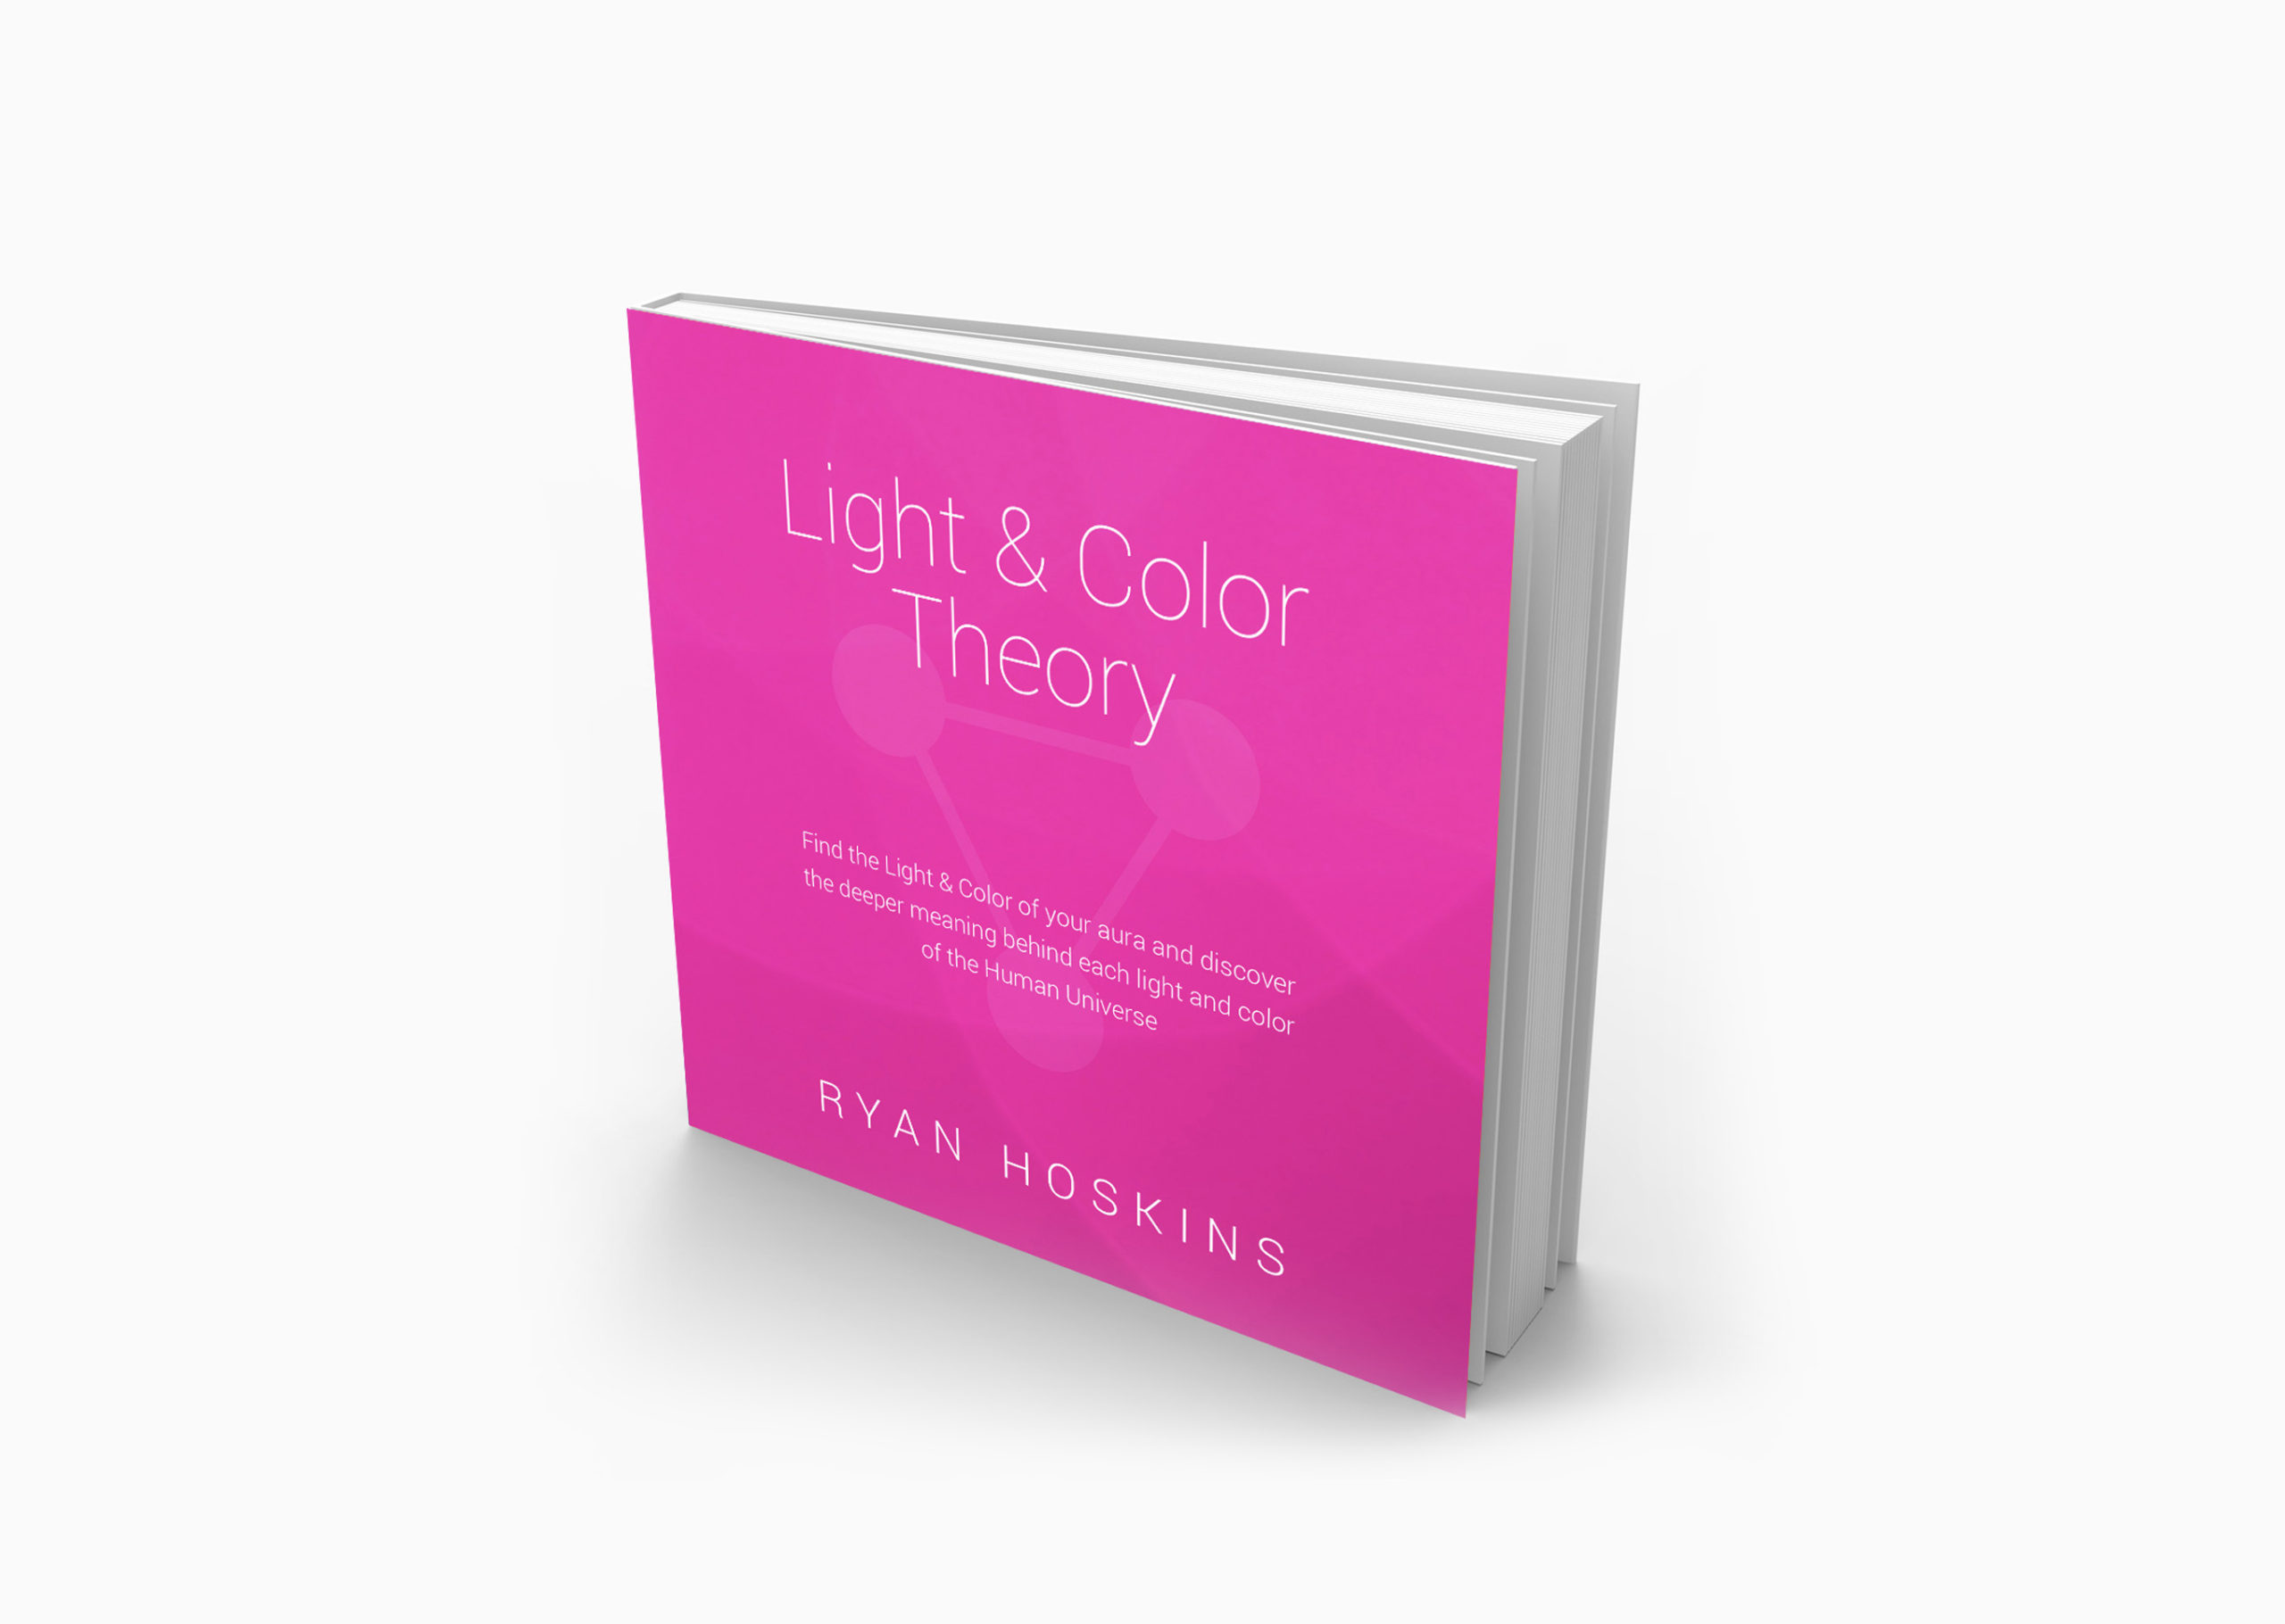 Light & Color Theory book cover